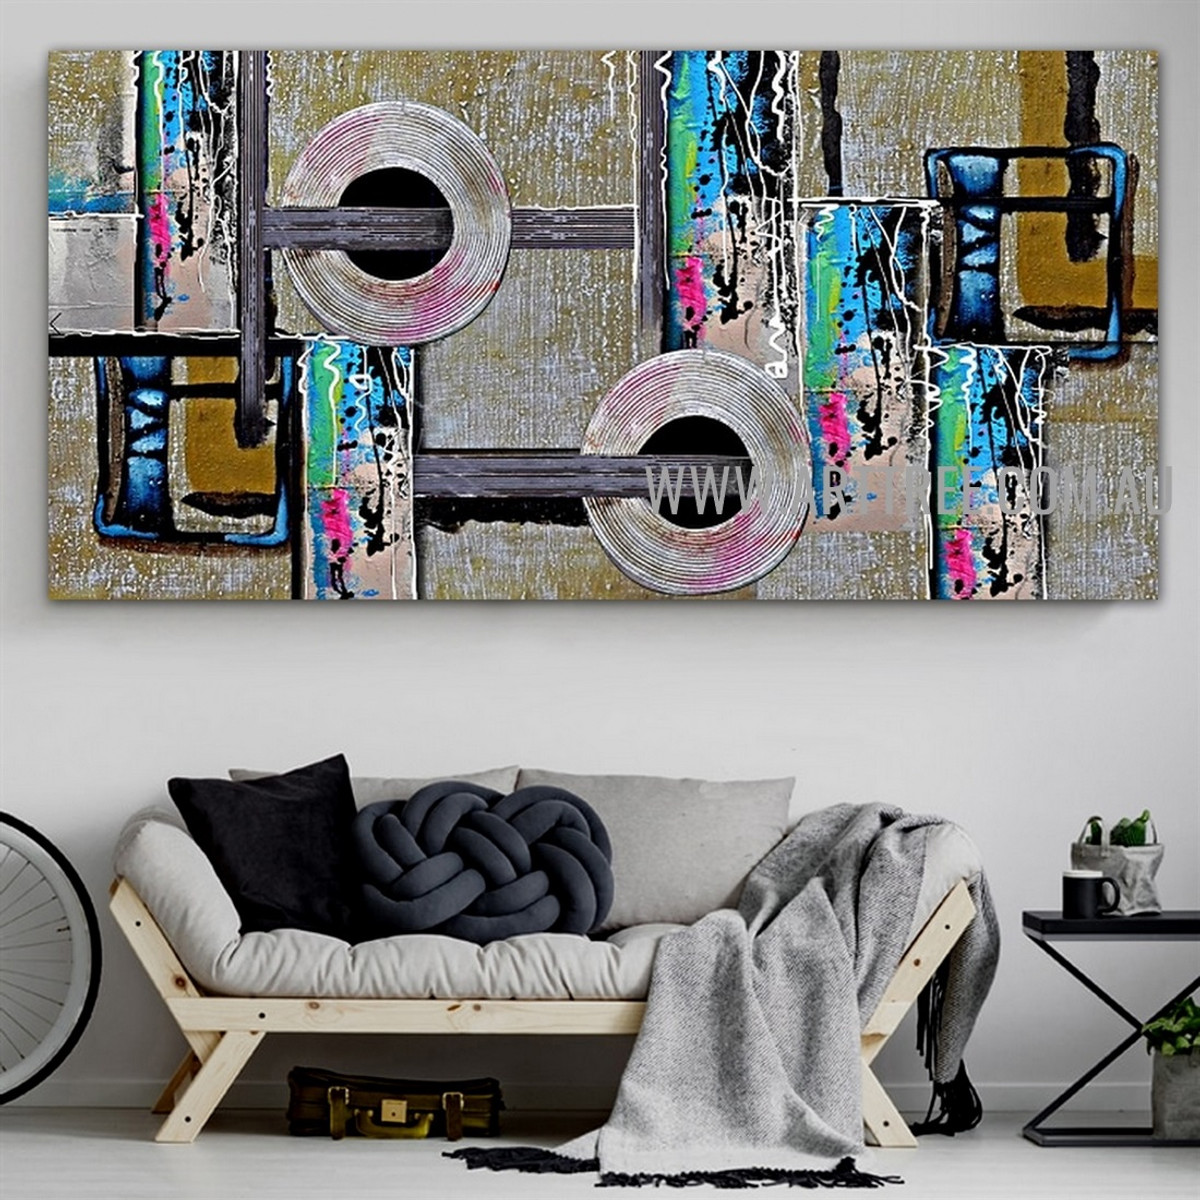 Orbed Abstract Geometric Artist Handmade Impasto Stretched Contemporary Art Painting For Room Wall Tracery